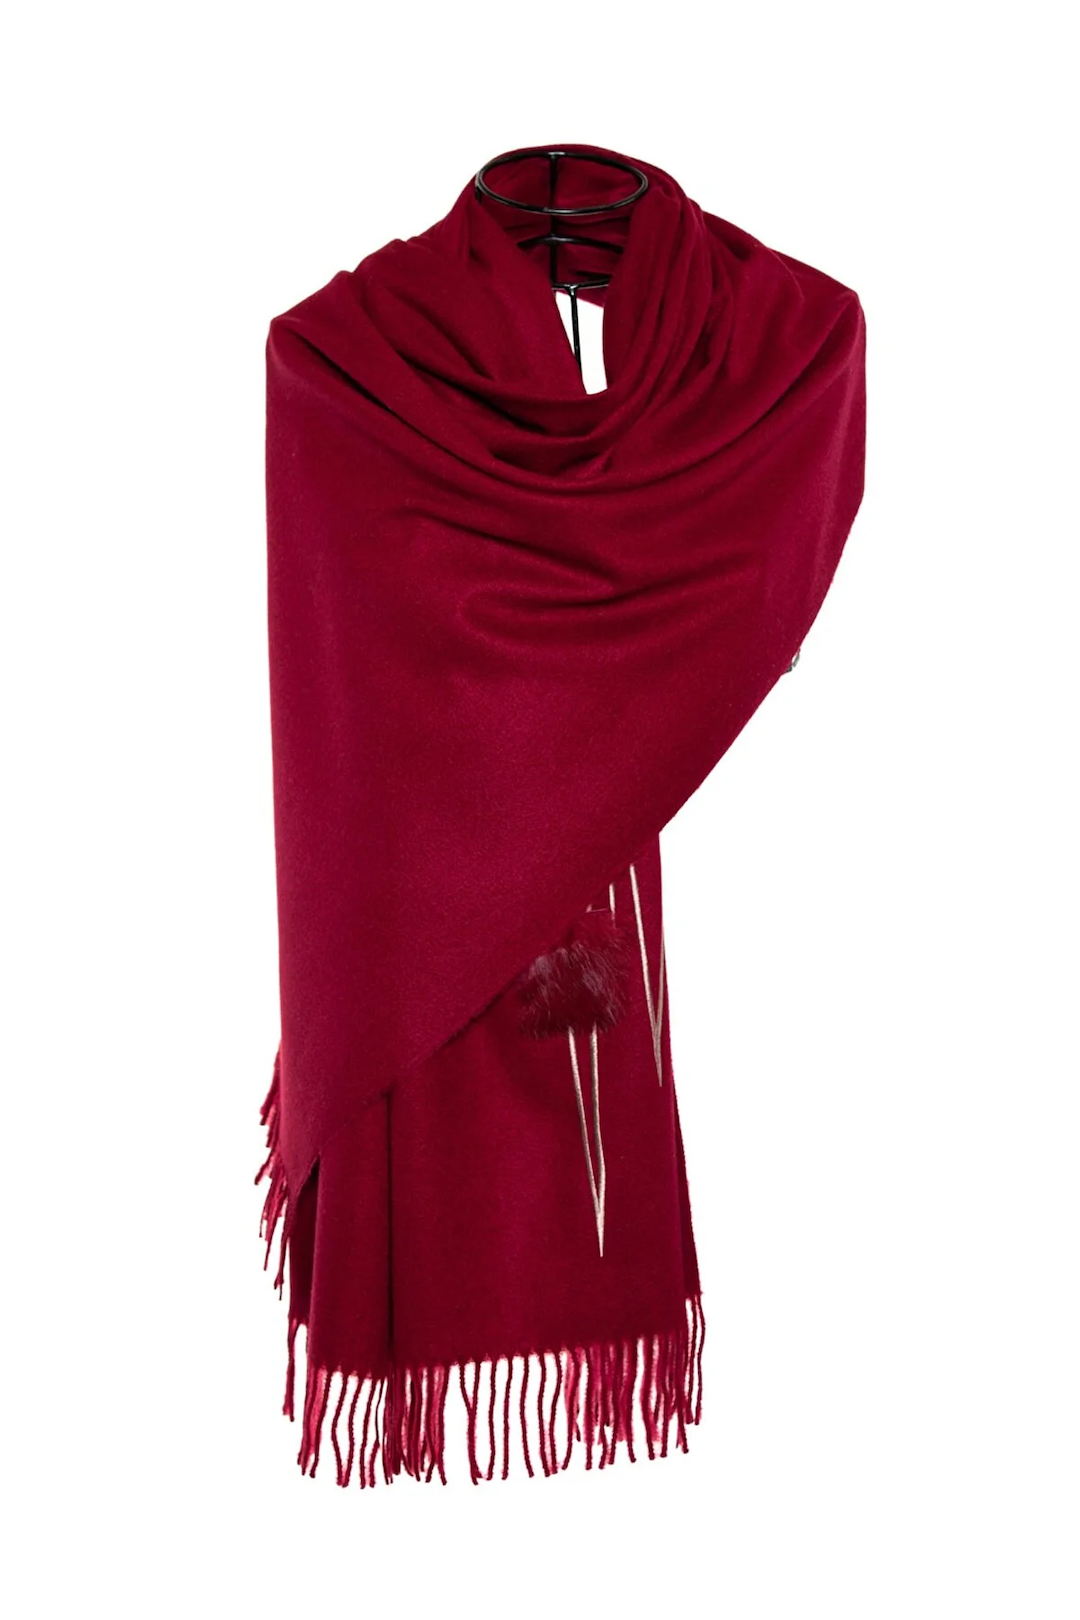 Heart Beat Embroidered Shawl with Faux Fur Pon Pons - Maroon